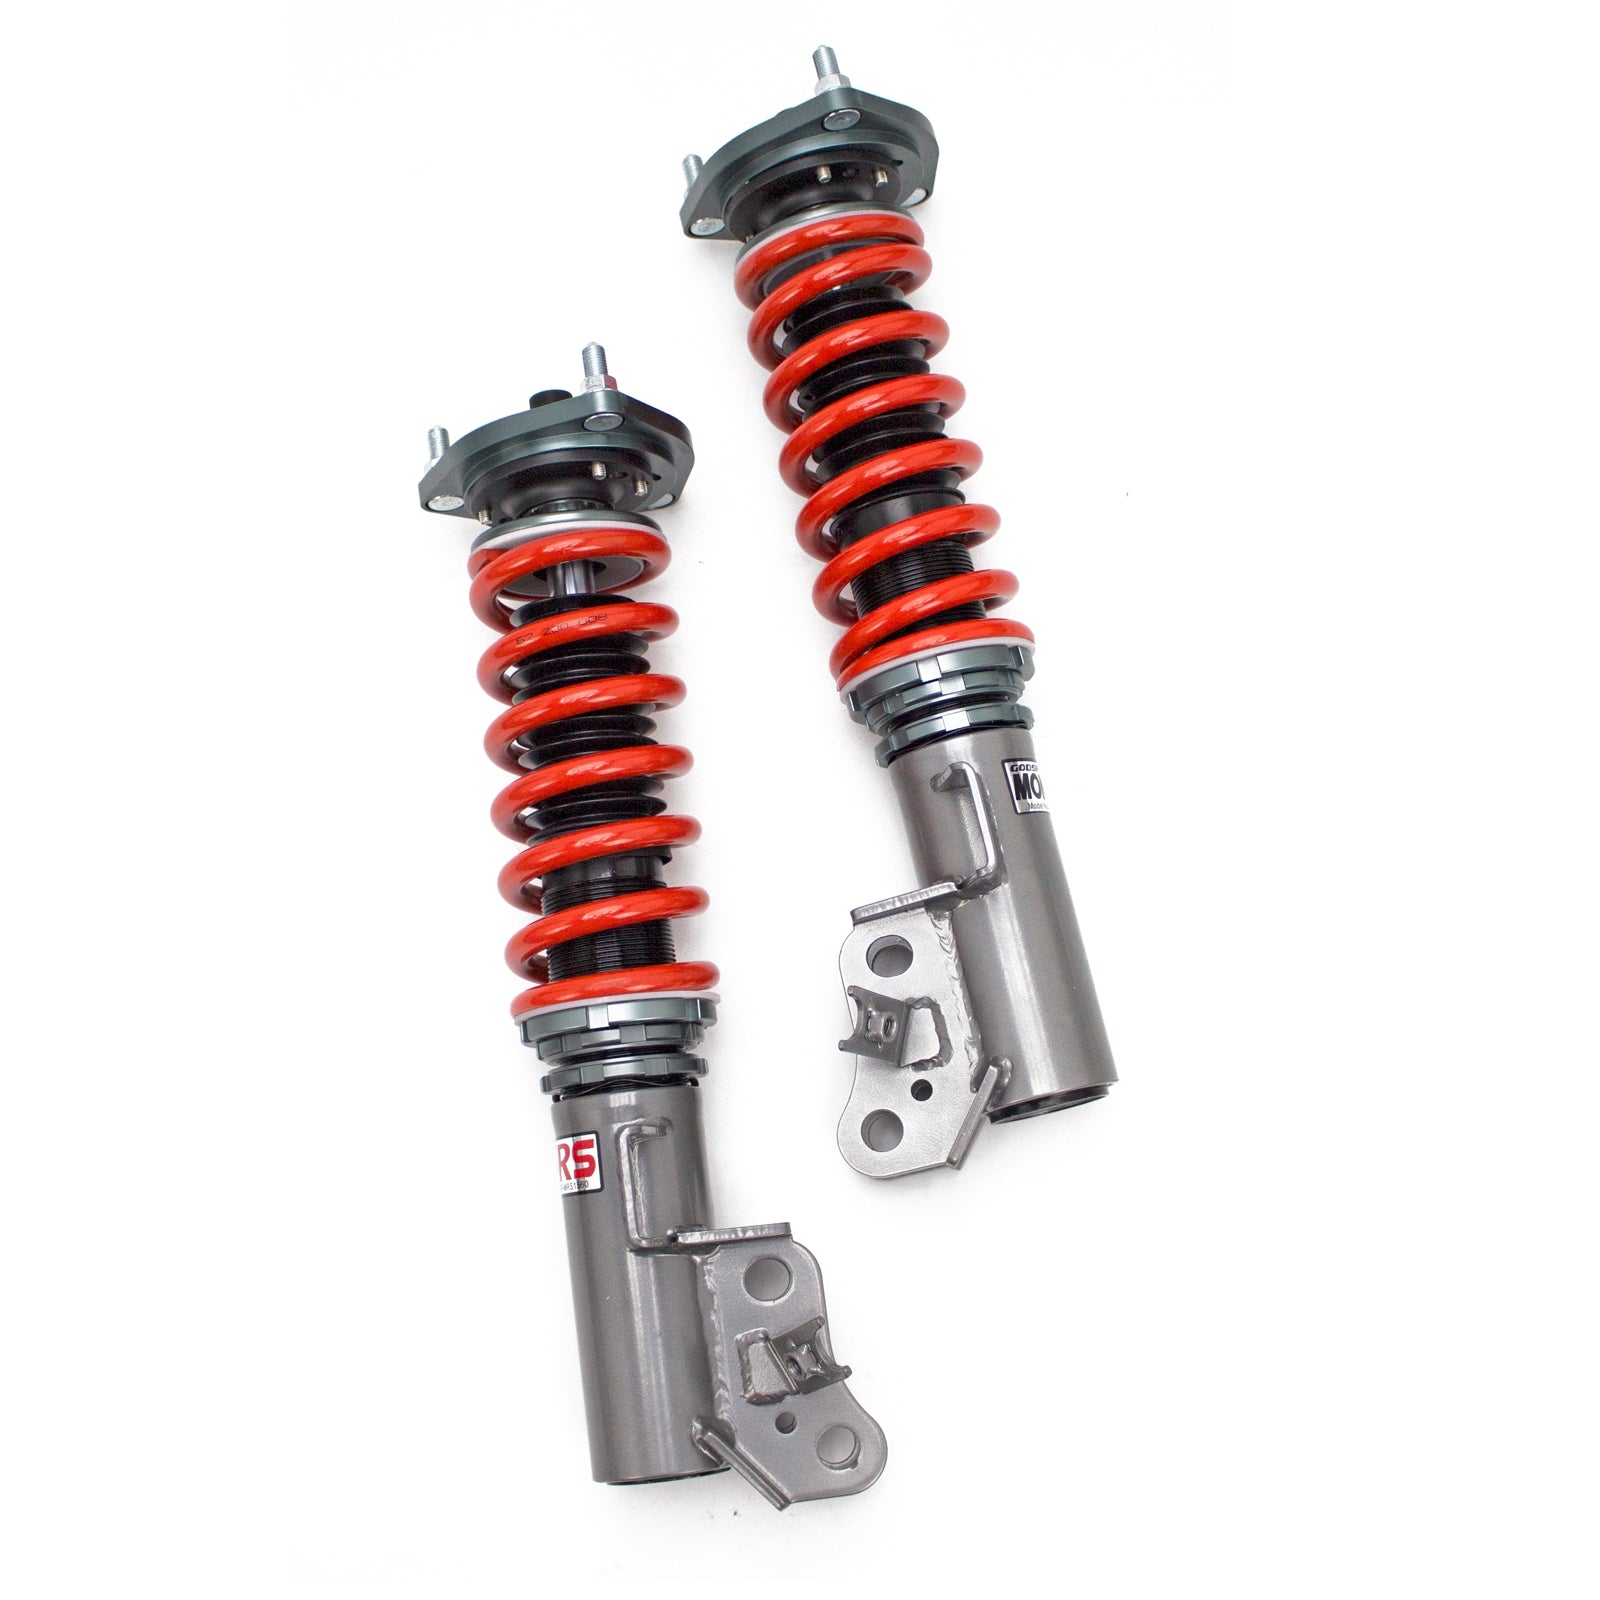 Godspeed MRS1560-C MonoRS Coilover Lowering Kit, 32 Damping Adjustment, Ride Height Adjustable